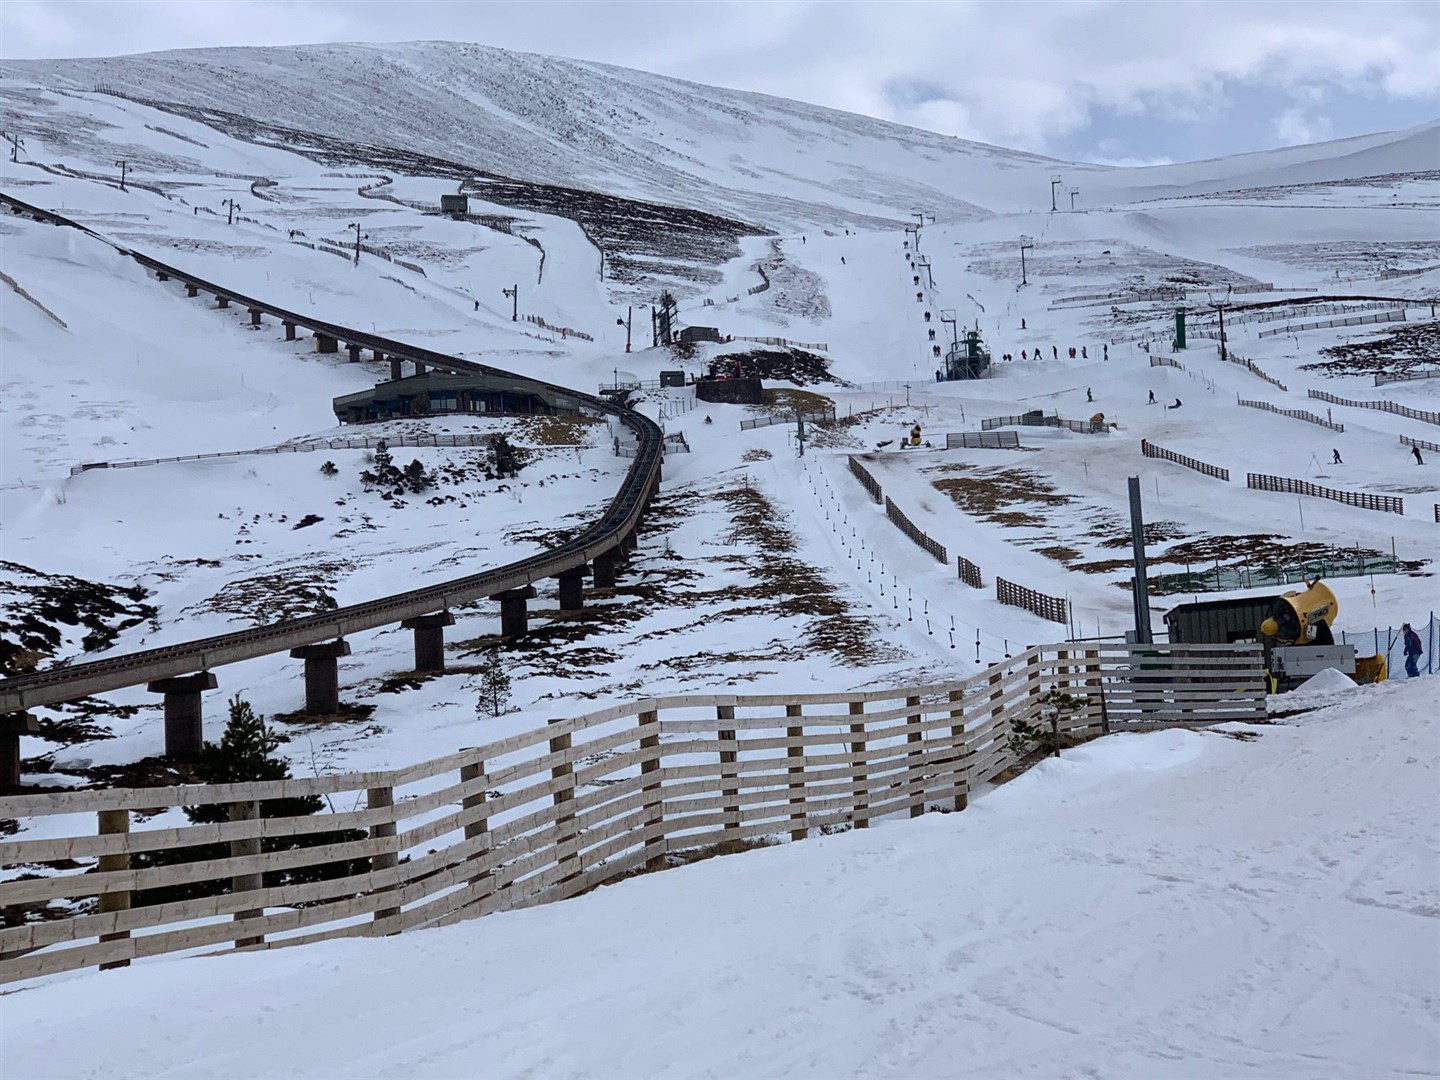 ACGT was formed two and a half a years ago to take community control of Cairngorm Mountain and the wider estate but has made little progress despite the best efforts of directors past and present.